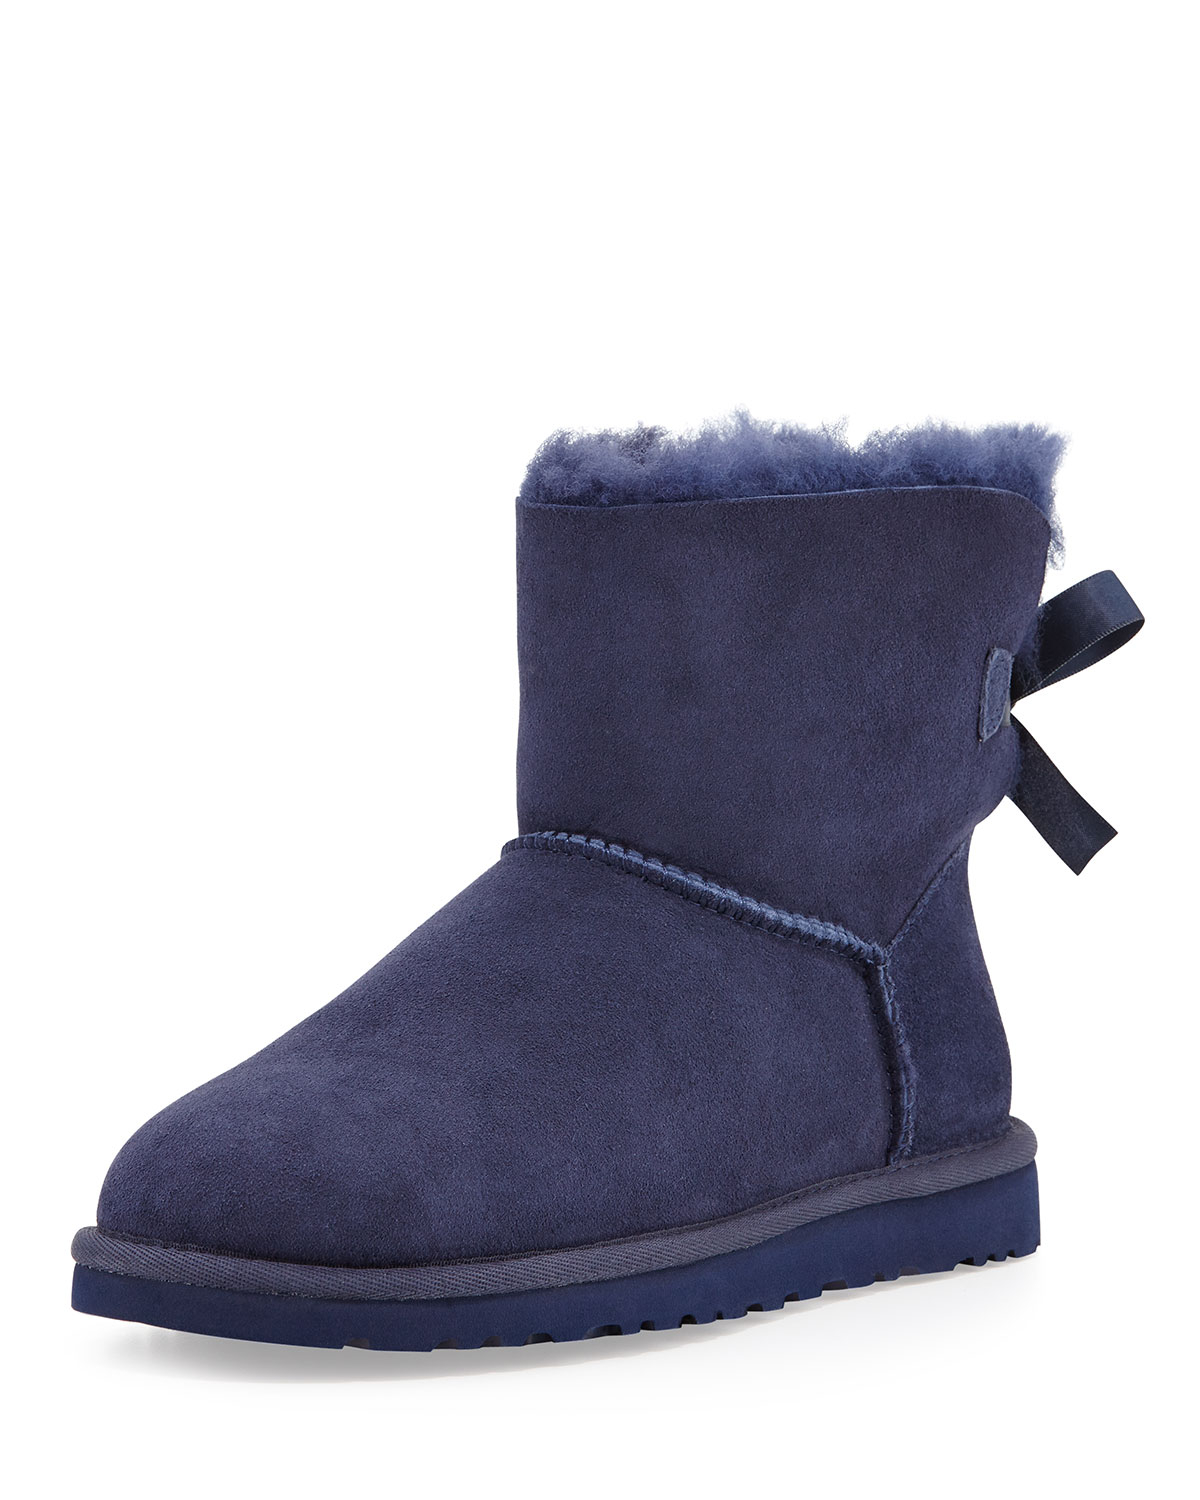 navy blue uggs for toddlers off 64 